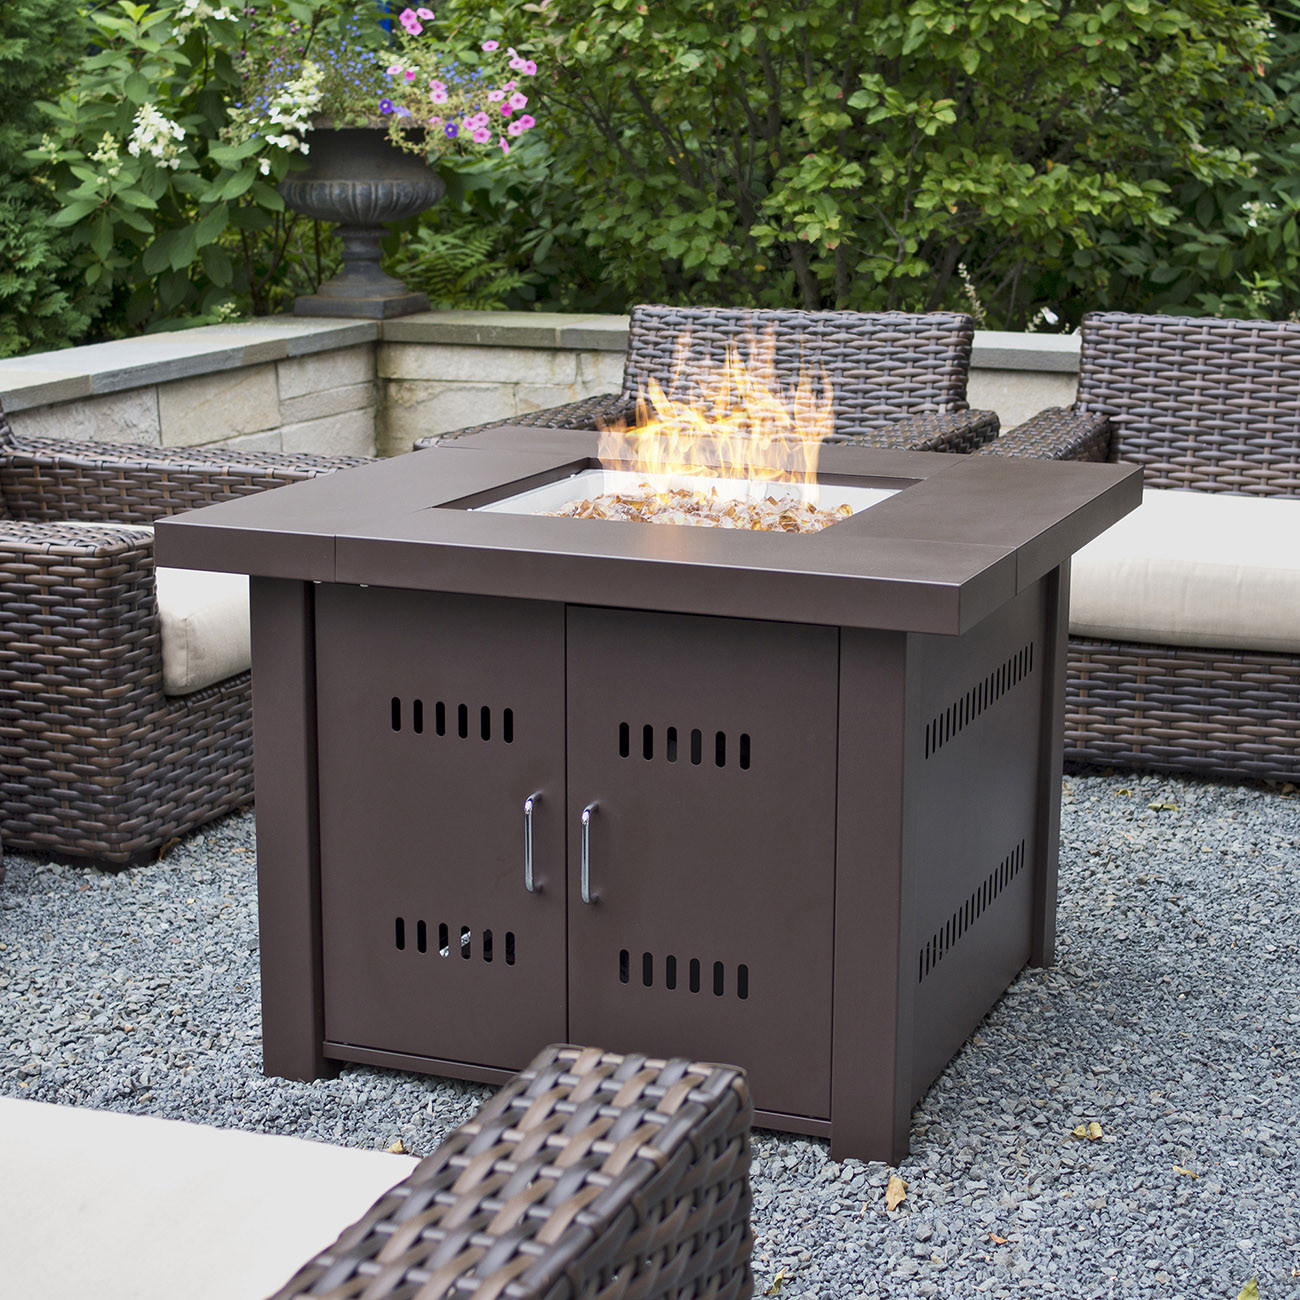 Patio Fire Pit Propane
 NEW Outdoor Fire Pit Square Table Firepit Propane Gas Fire